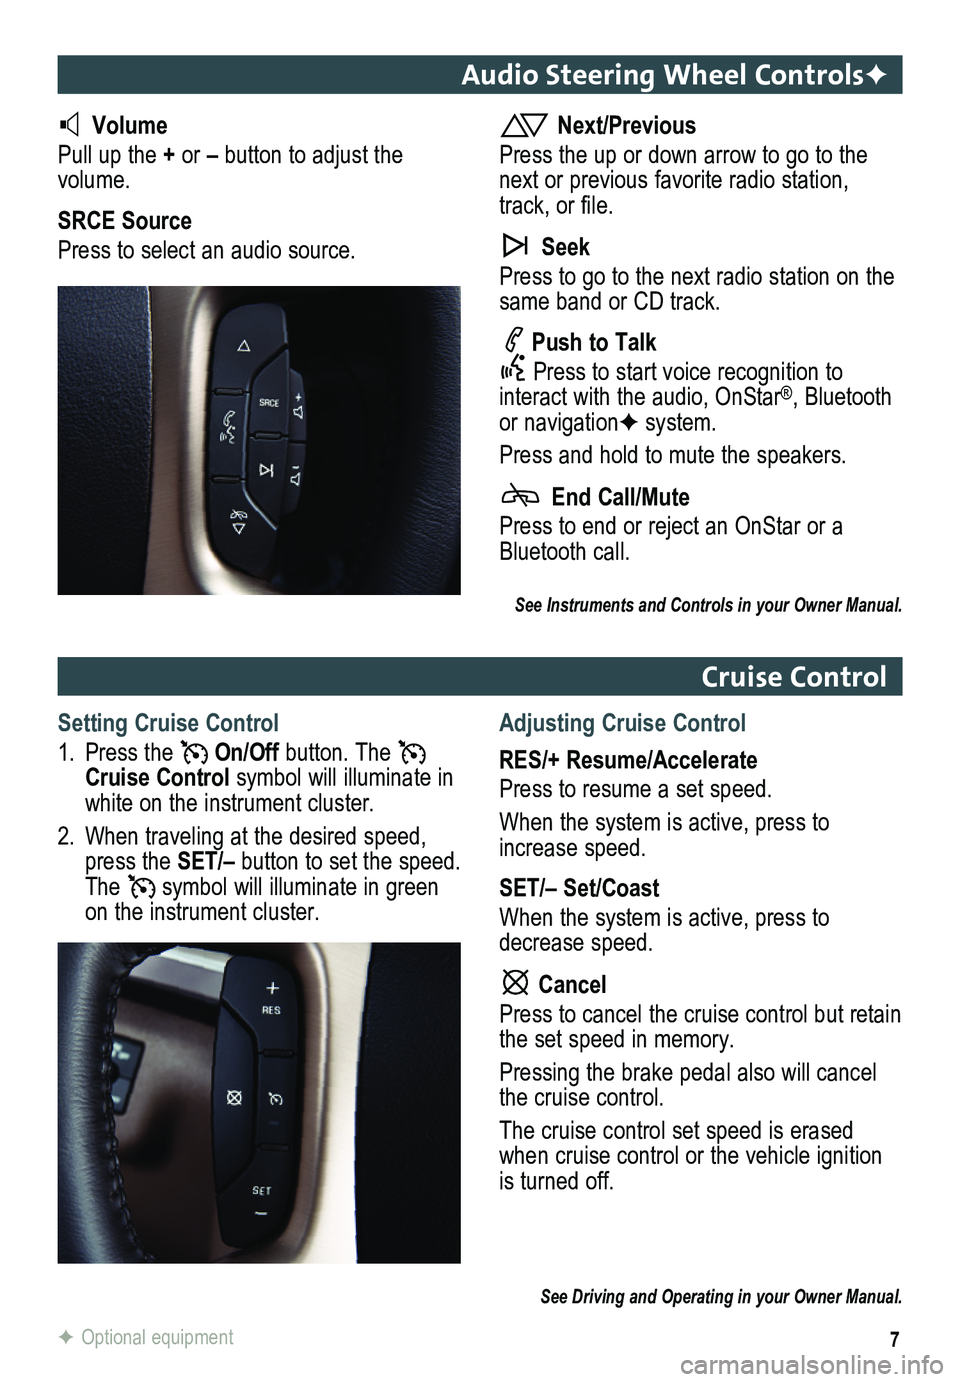 GMC ACADIA 2013  Get To Know Guide 7
Audio Steering Wheel ControlsF
  Volume
Pull up the + or – button to adjust the volume.
SRCE Source
Press to select an audio source.
 Next/Previous
Press the up or down arrow to go to the next or 